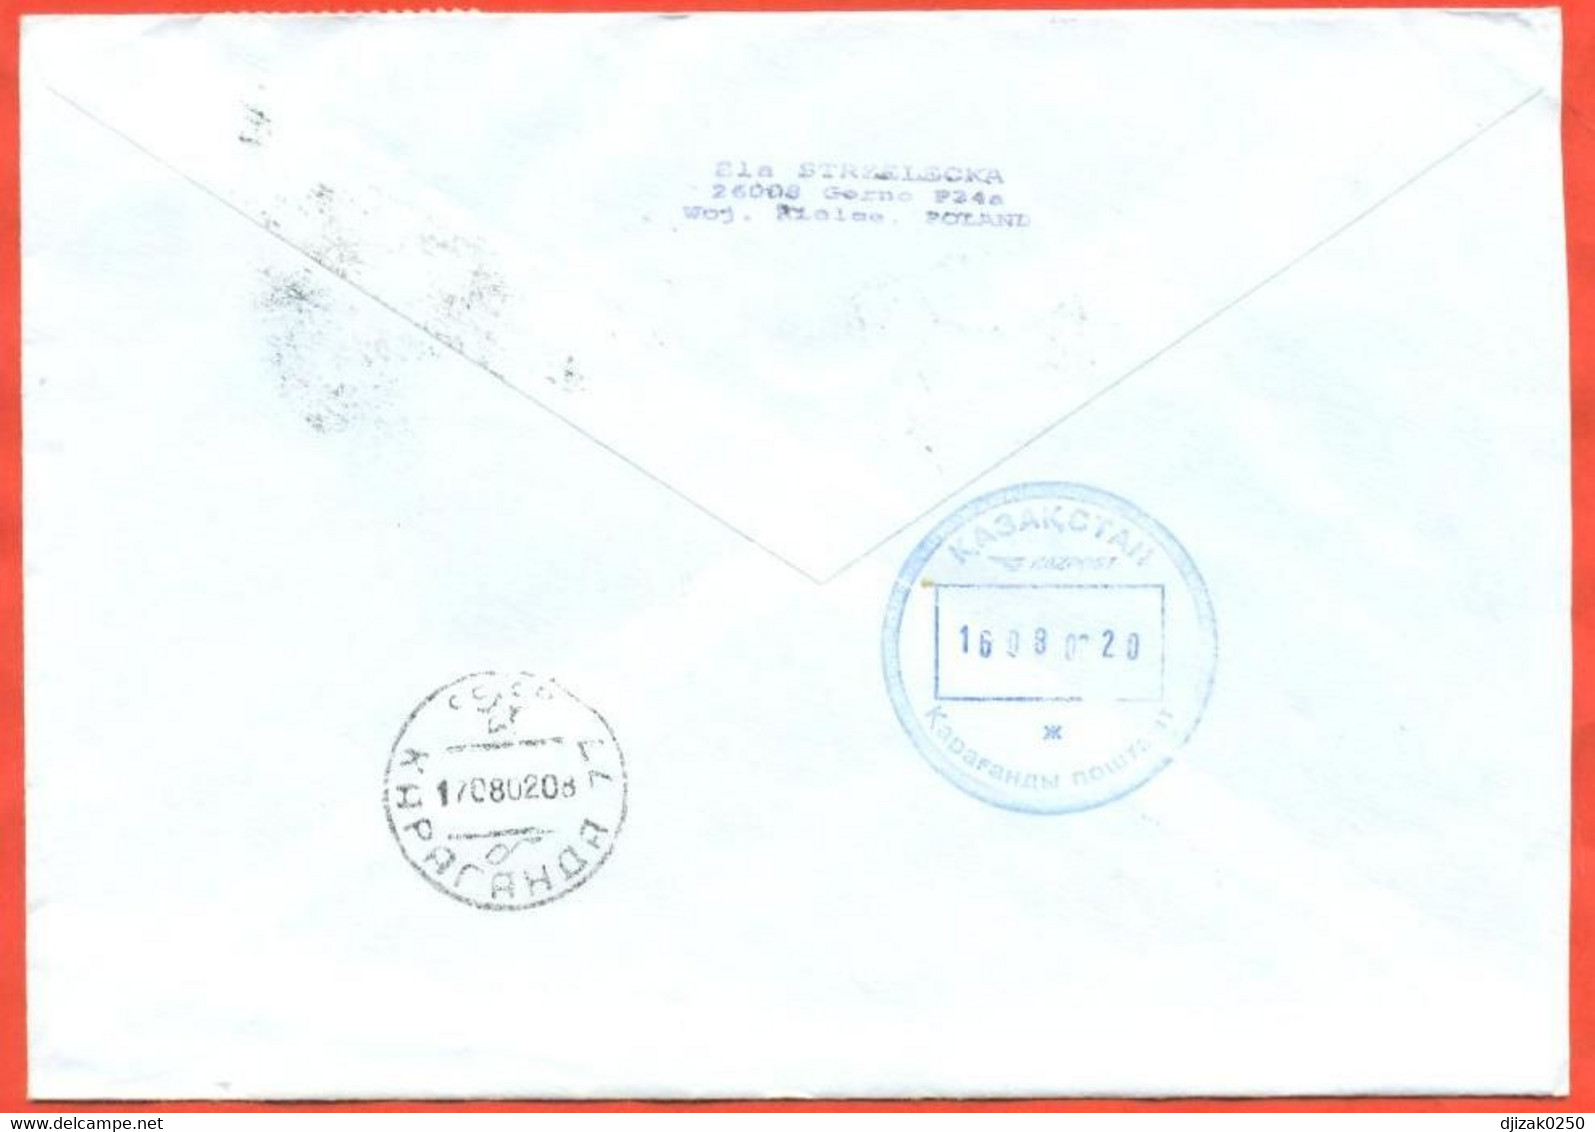 Poland 2002. The Envelope  Passed Through The Mail. Airmail. - Storia Postale